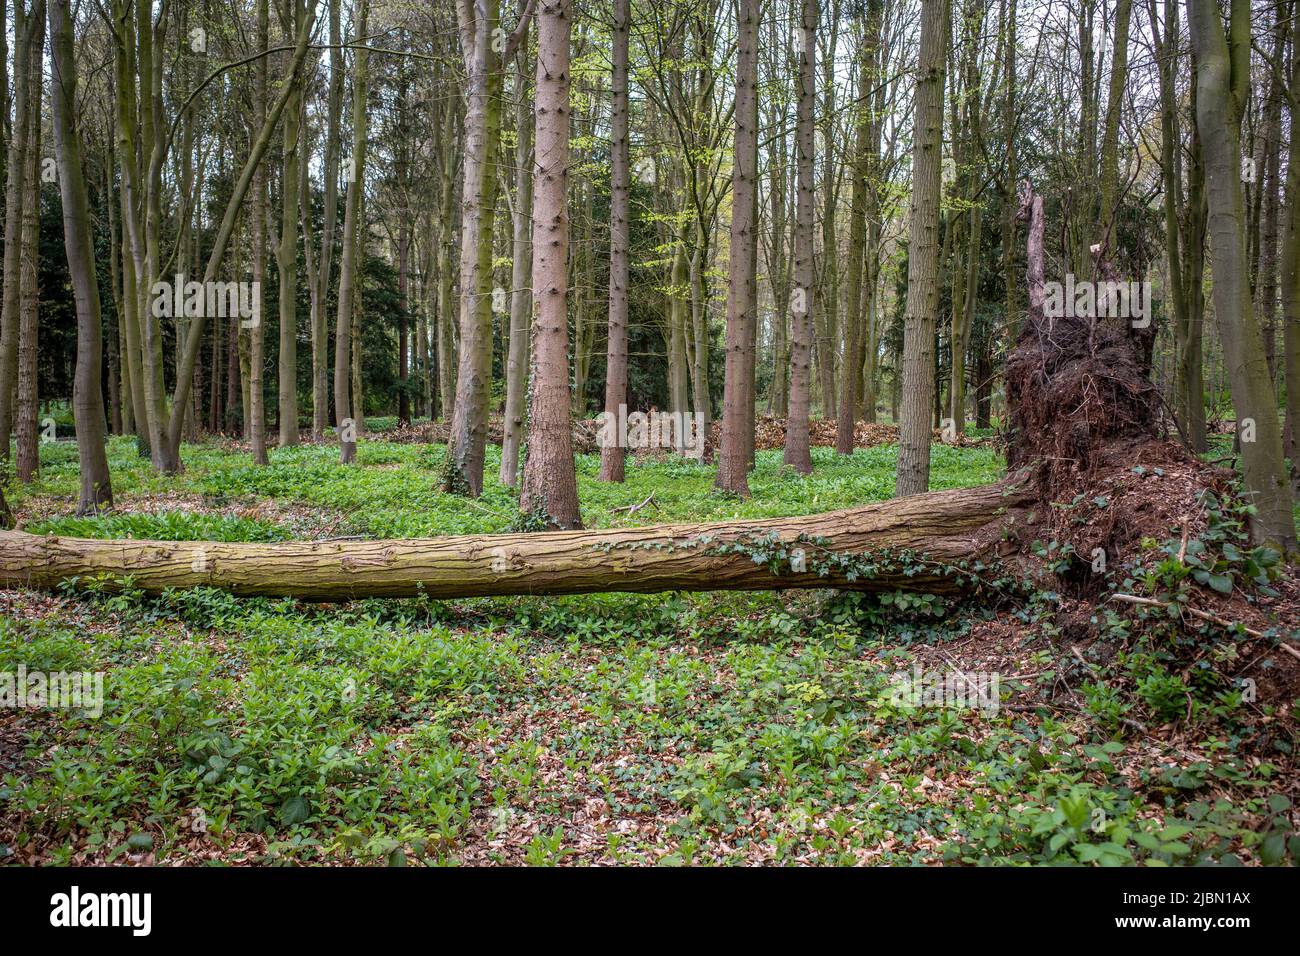 A large fallen tree with roots in a woodland with other standing trees in the background. Stock Photo